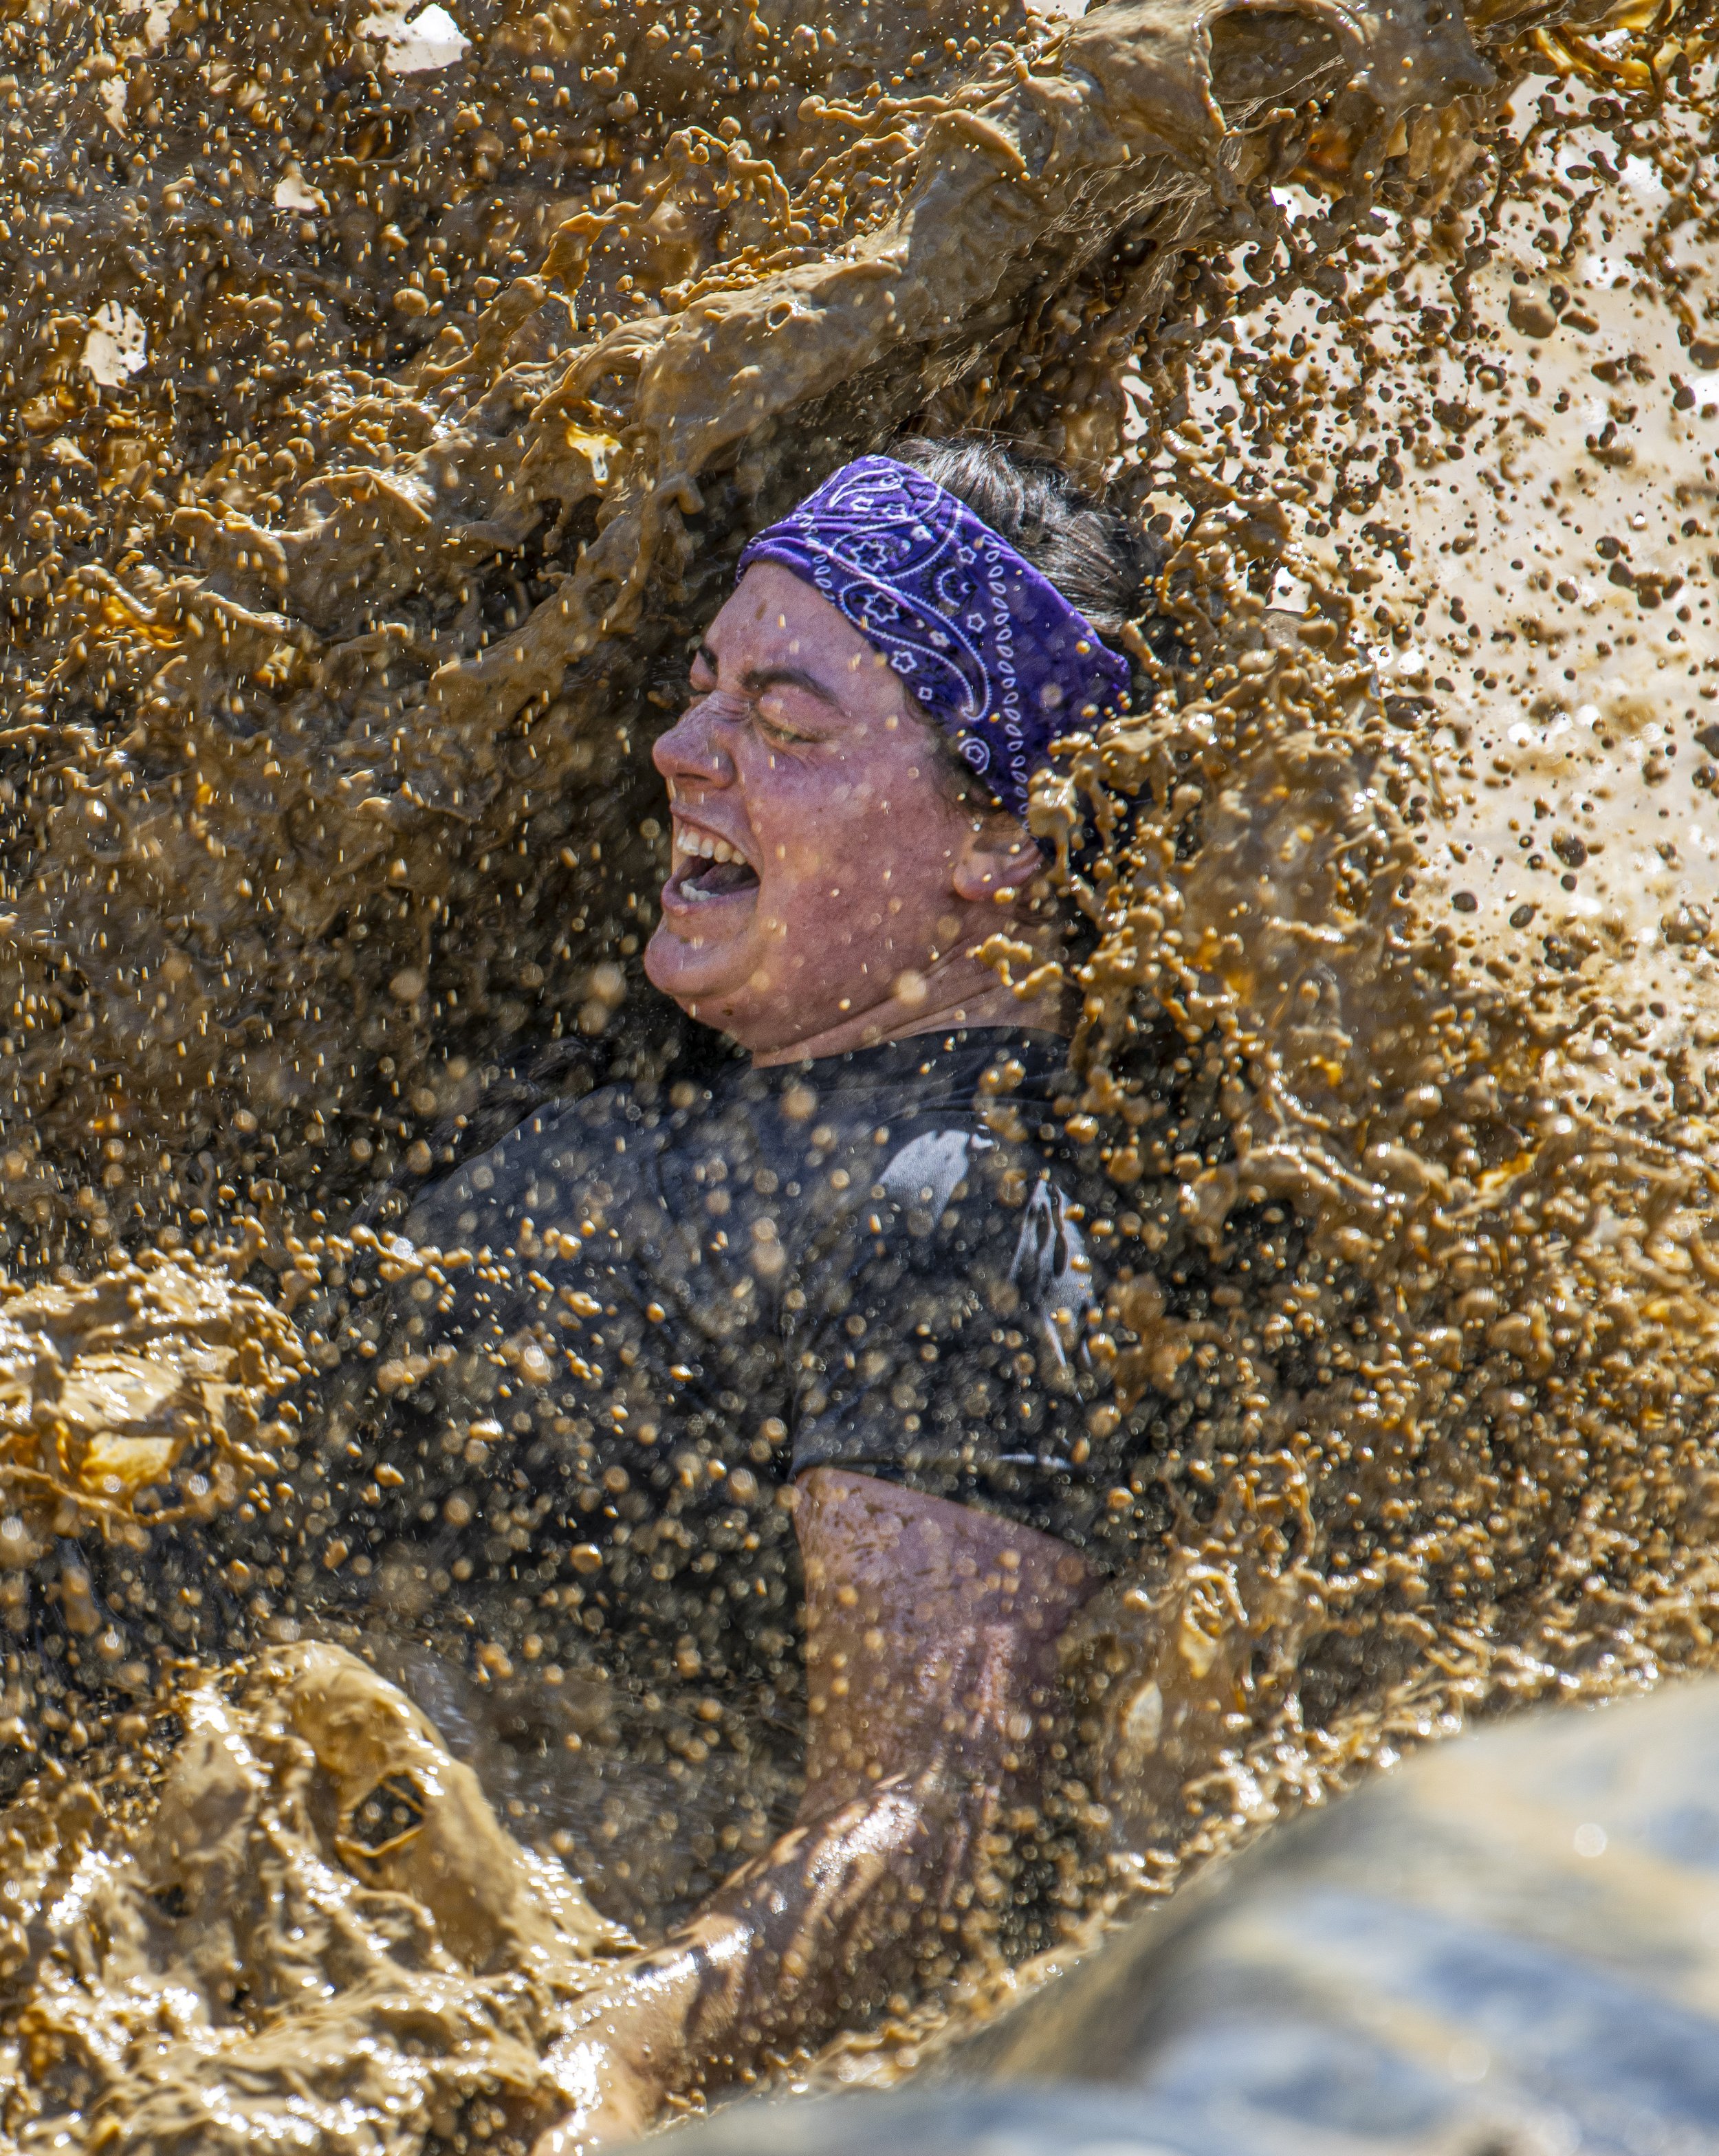  A Tough Mudder Competitor crashes into the Muddy water at the mud slide portion of the course at the Tough Mudder event held in San Bernadino on April 9, 2022. (Jon Putman | The Corsair) 